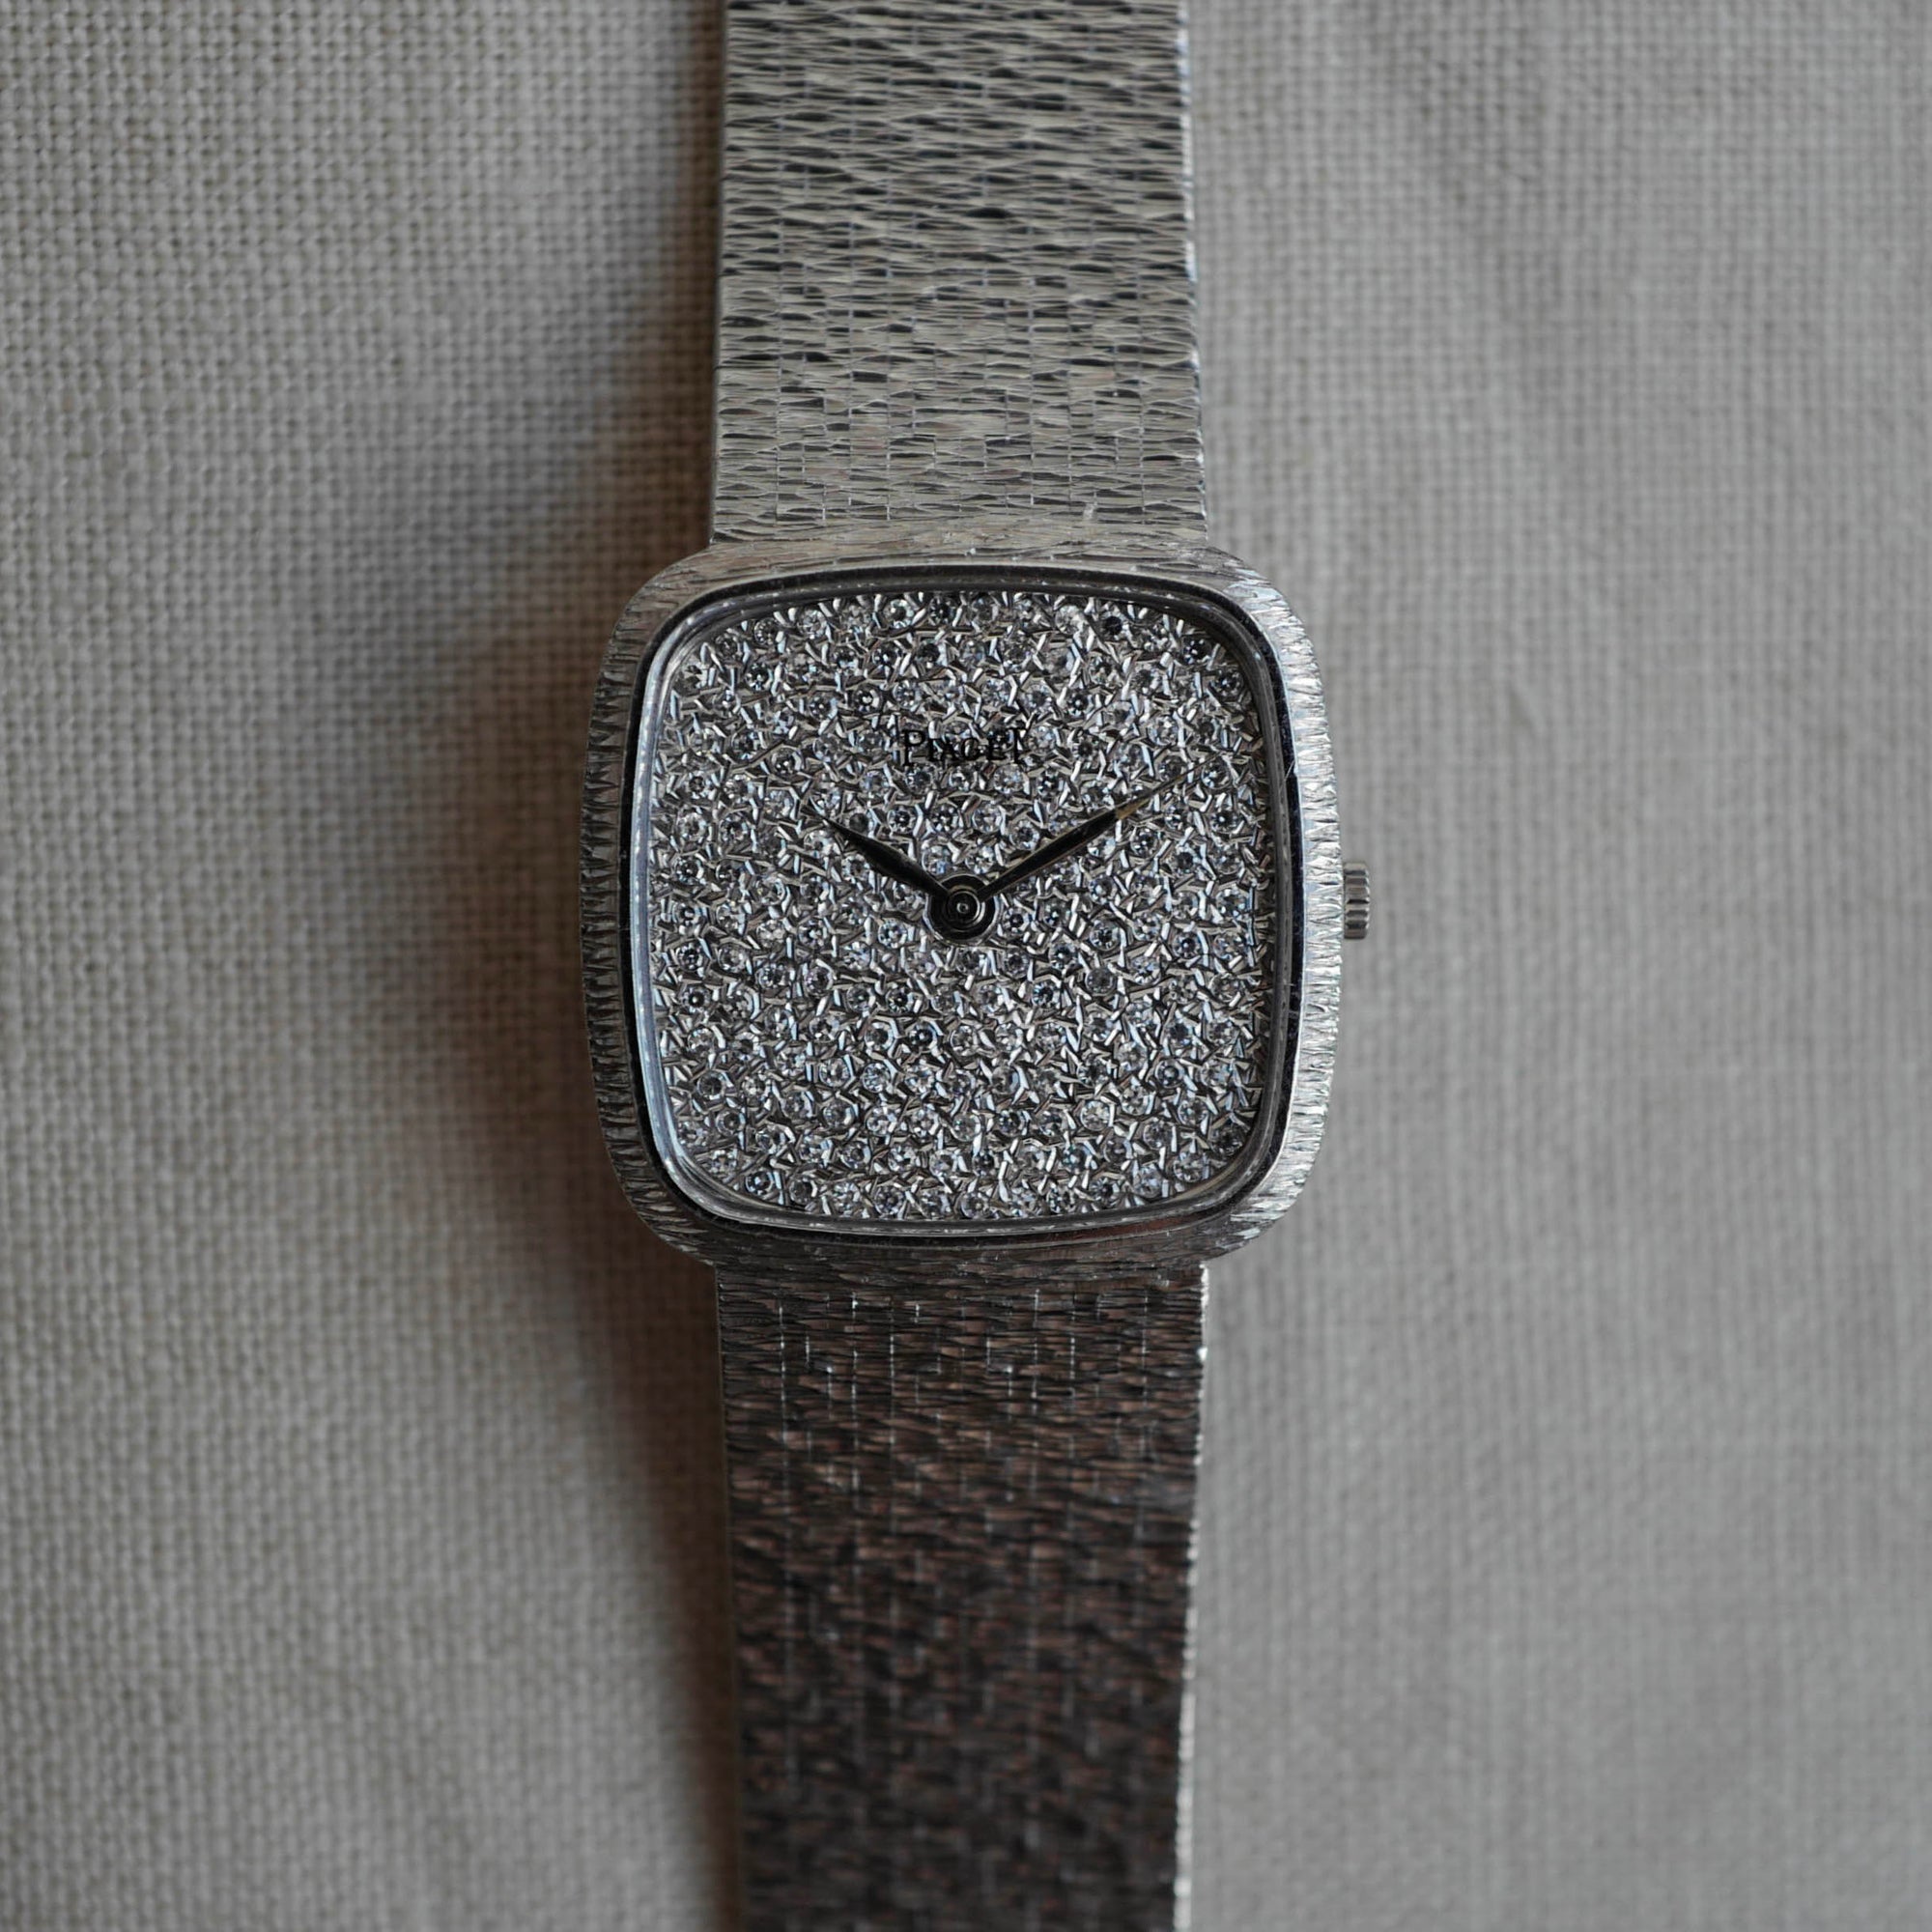 Piaget - Piaget White Gold Diamond Dial Ref. 9771 - The Keystone Watches